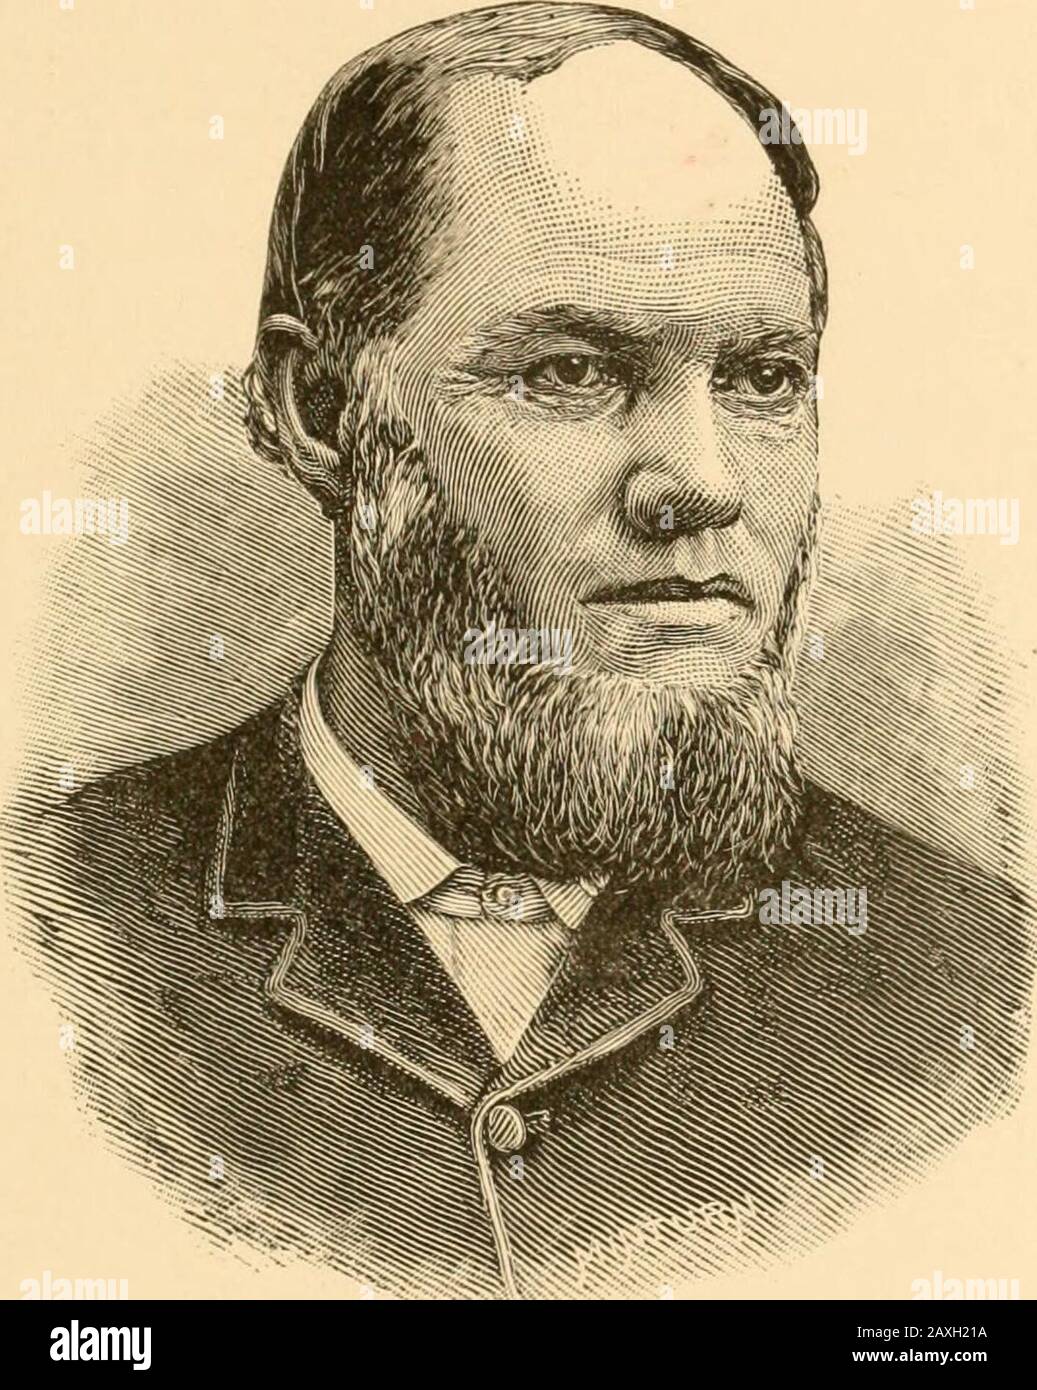 Early life and times in Boone County, Indiana, giving an account of the early settlement of each locality, church histories, county and township officers from the first down to 1886 ..Biographical sketches of some of the prominent men and women .. . )rayer and class meeting, with preaching once infour weeks. The following preachers have served : ThomasJ. Brown, Joseph White, George W. Stafford, Ancel Beach,John B. Dernott, William Wilson, Samuel Reid, John Ed-wards, Henry Wells, James H. Newland, George W. Stafford,William Campbell, J. W. Bicketts, Wm. H. Smith, James B.Murshon, James Aldrich, Stock Photo